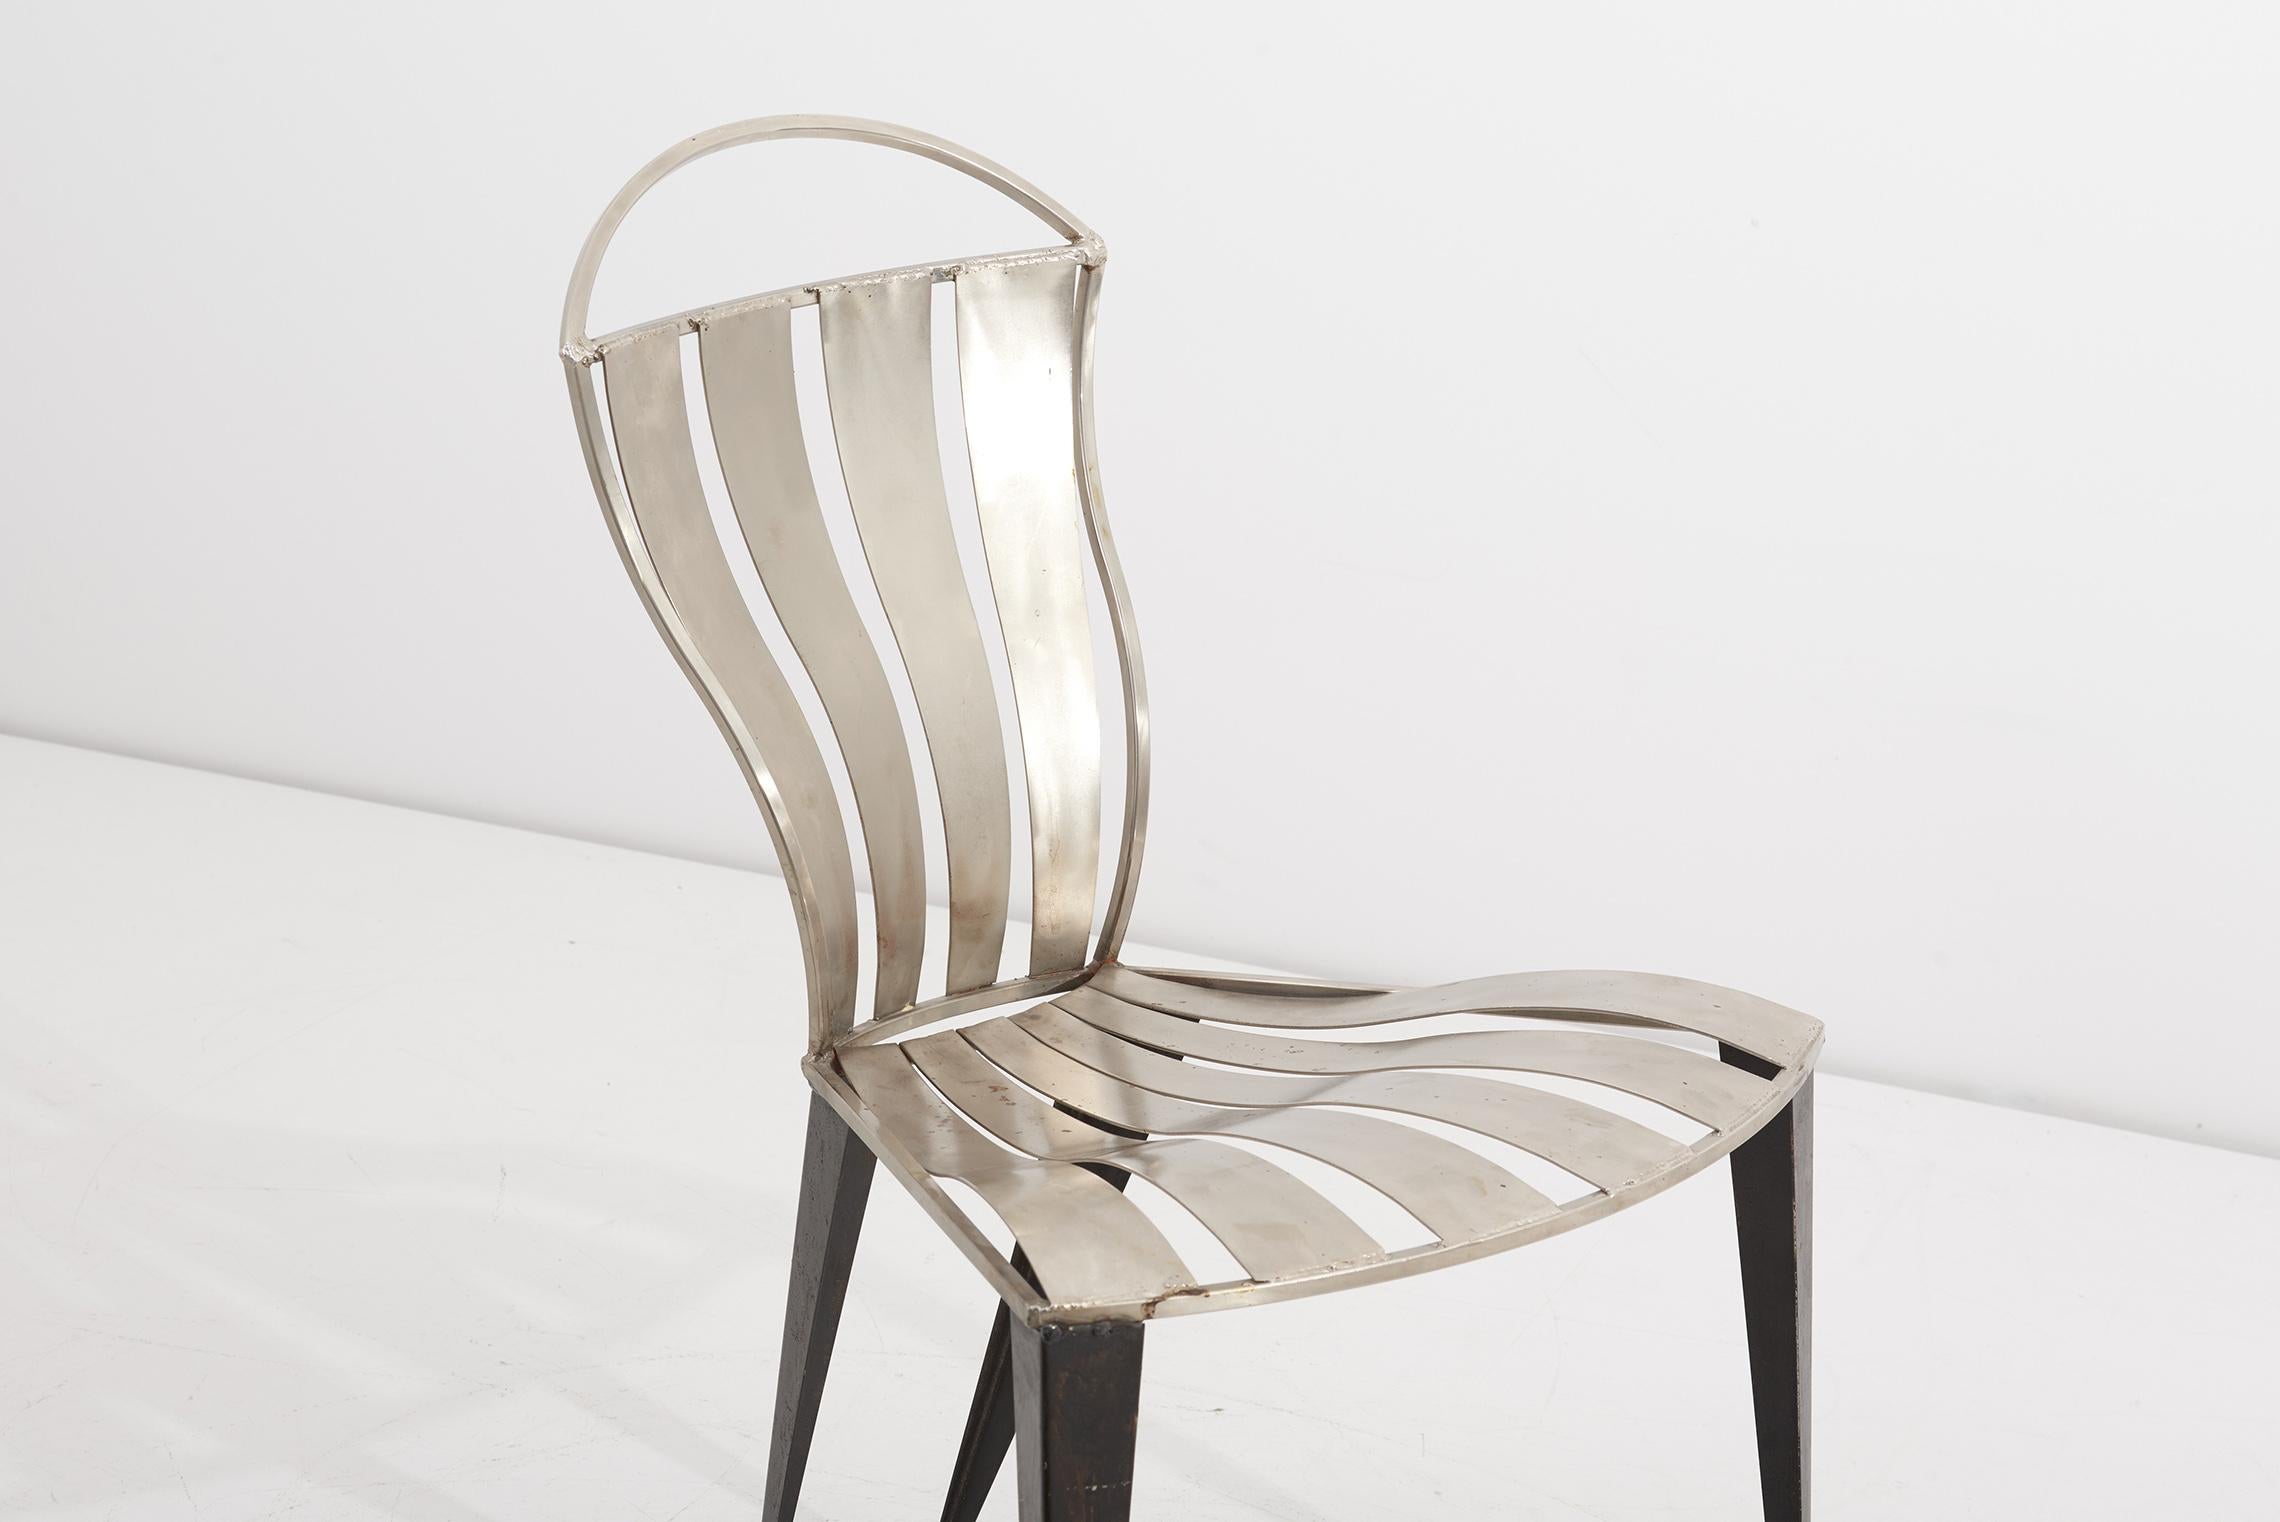 Prototype Steel Chair by Tom Dixon, 1989 For Sale 6